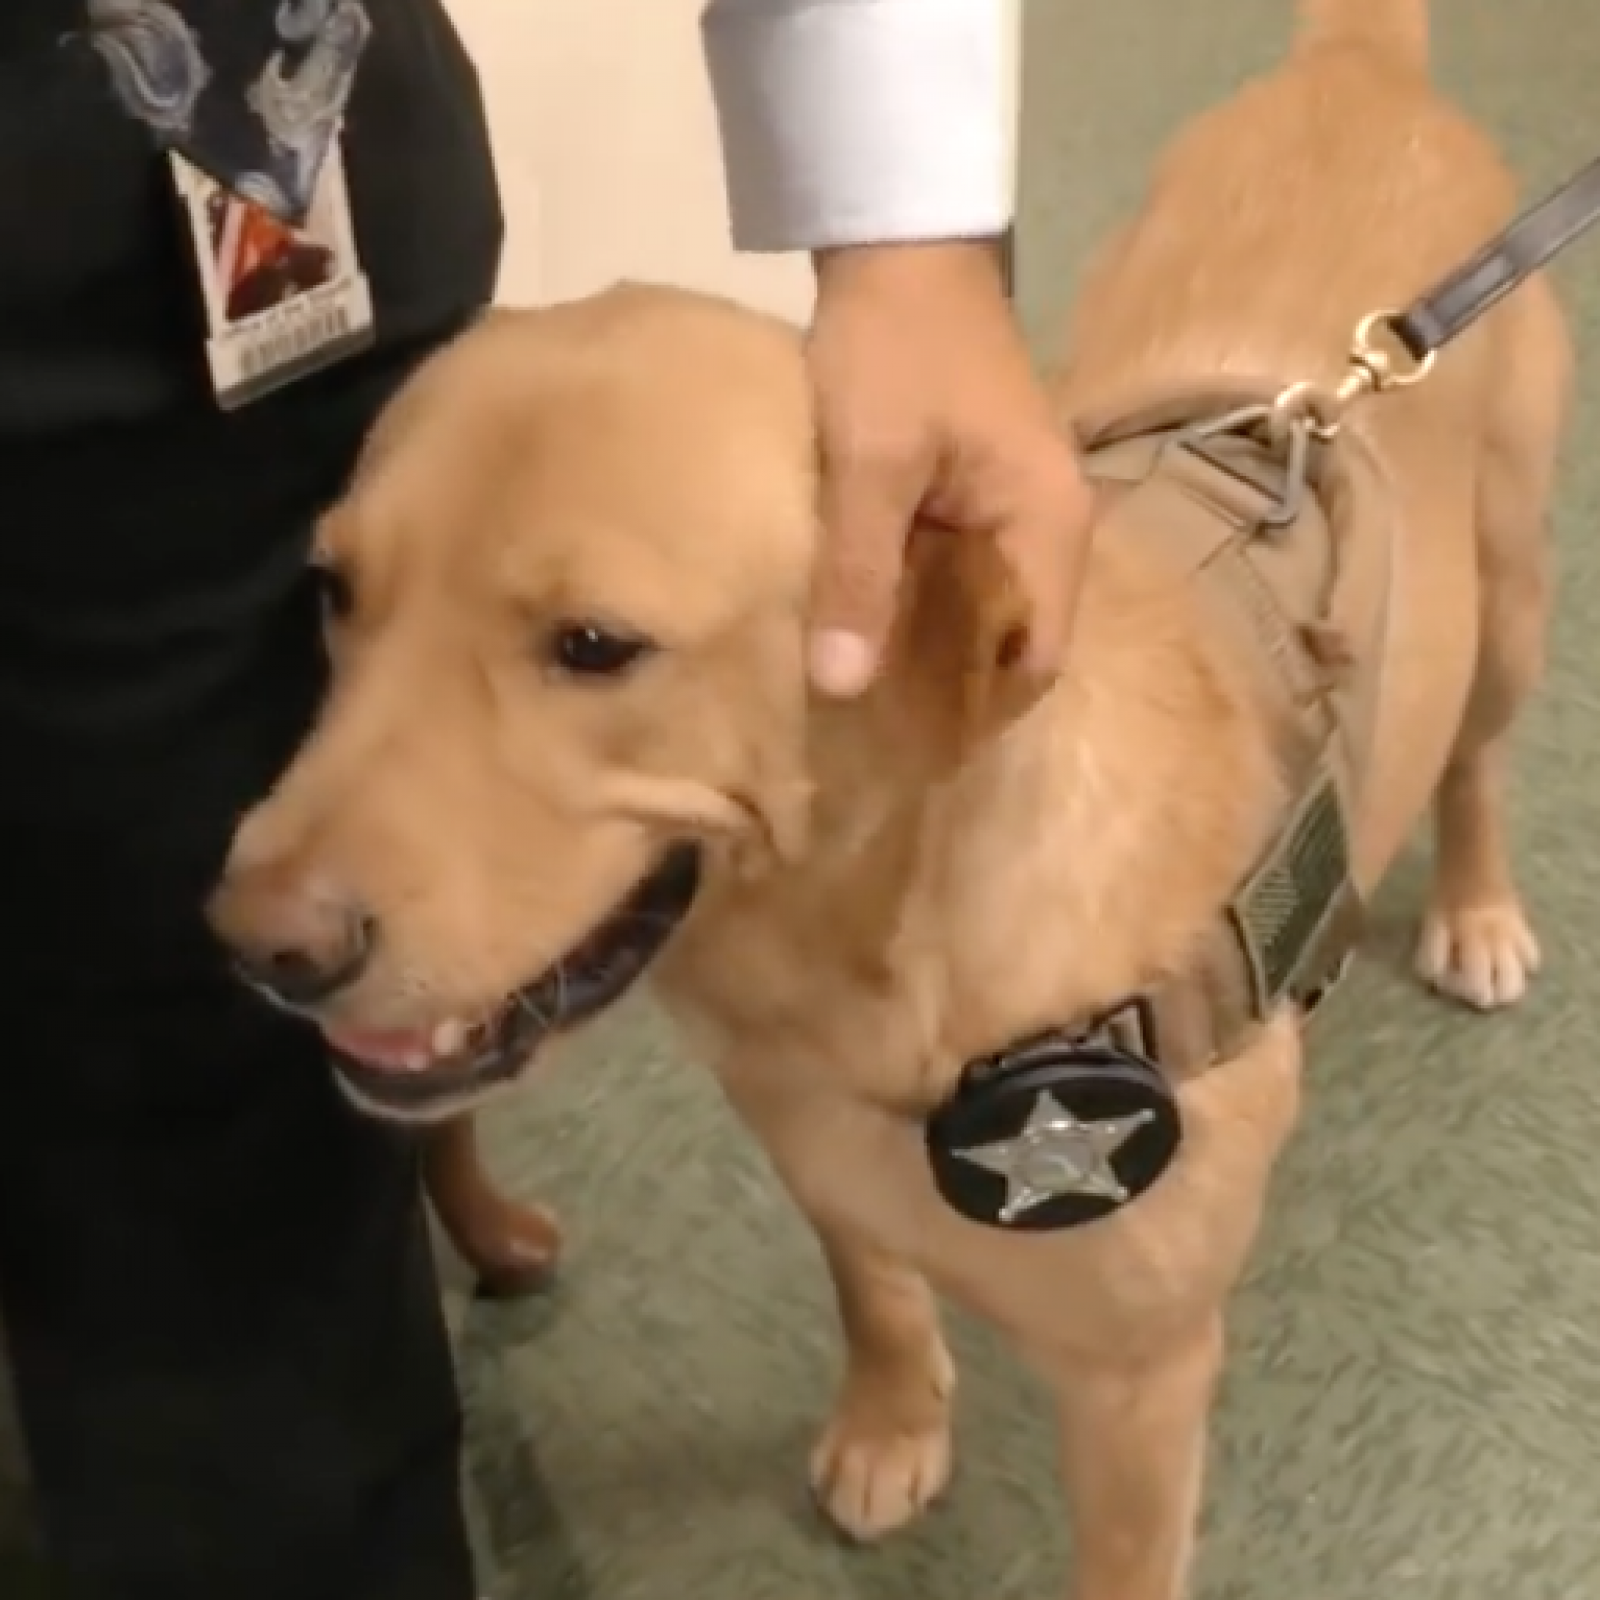 Doggie Porn - Florida Police Dog Trained to Sniff Out Child Porn on ...